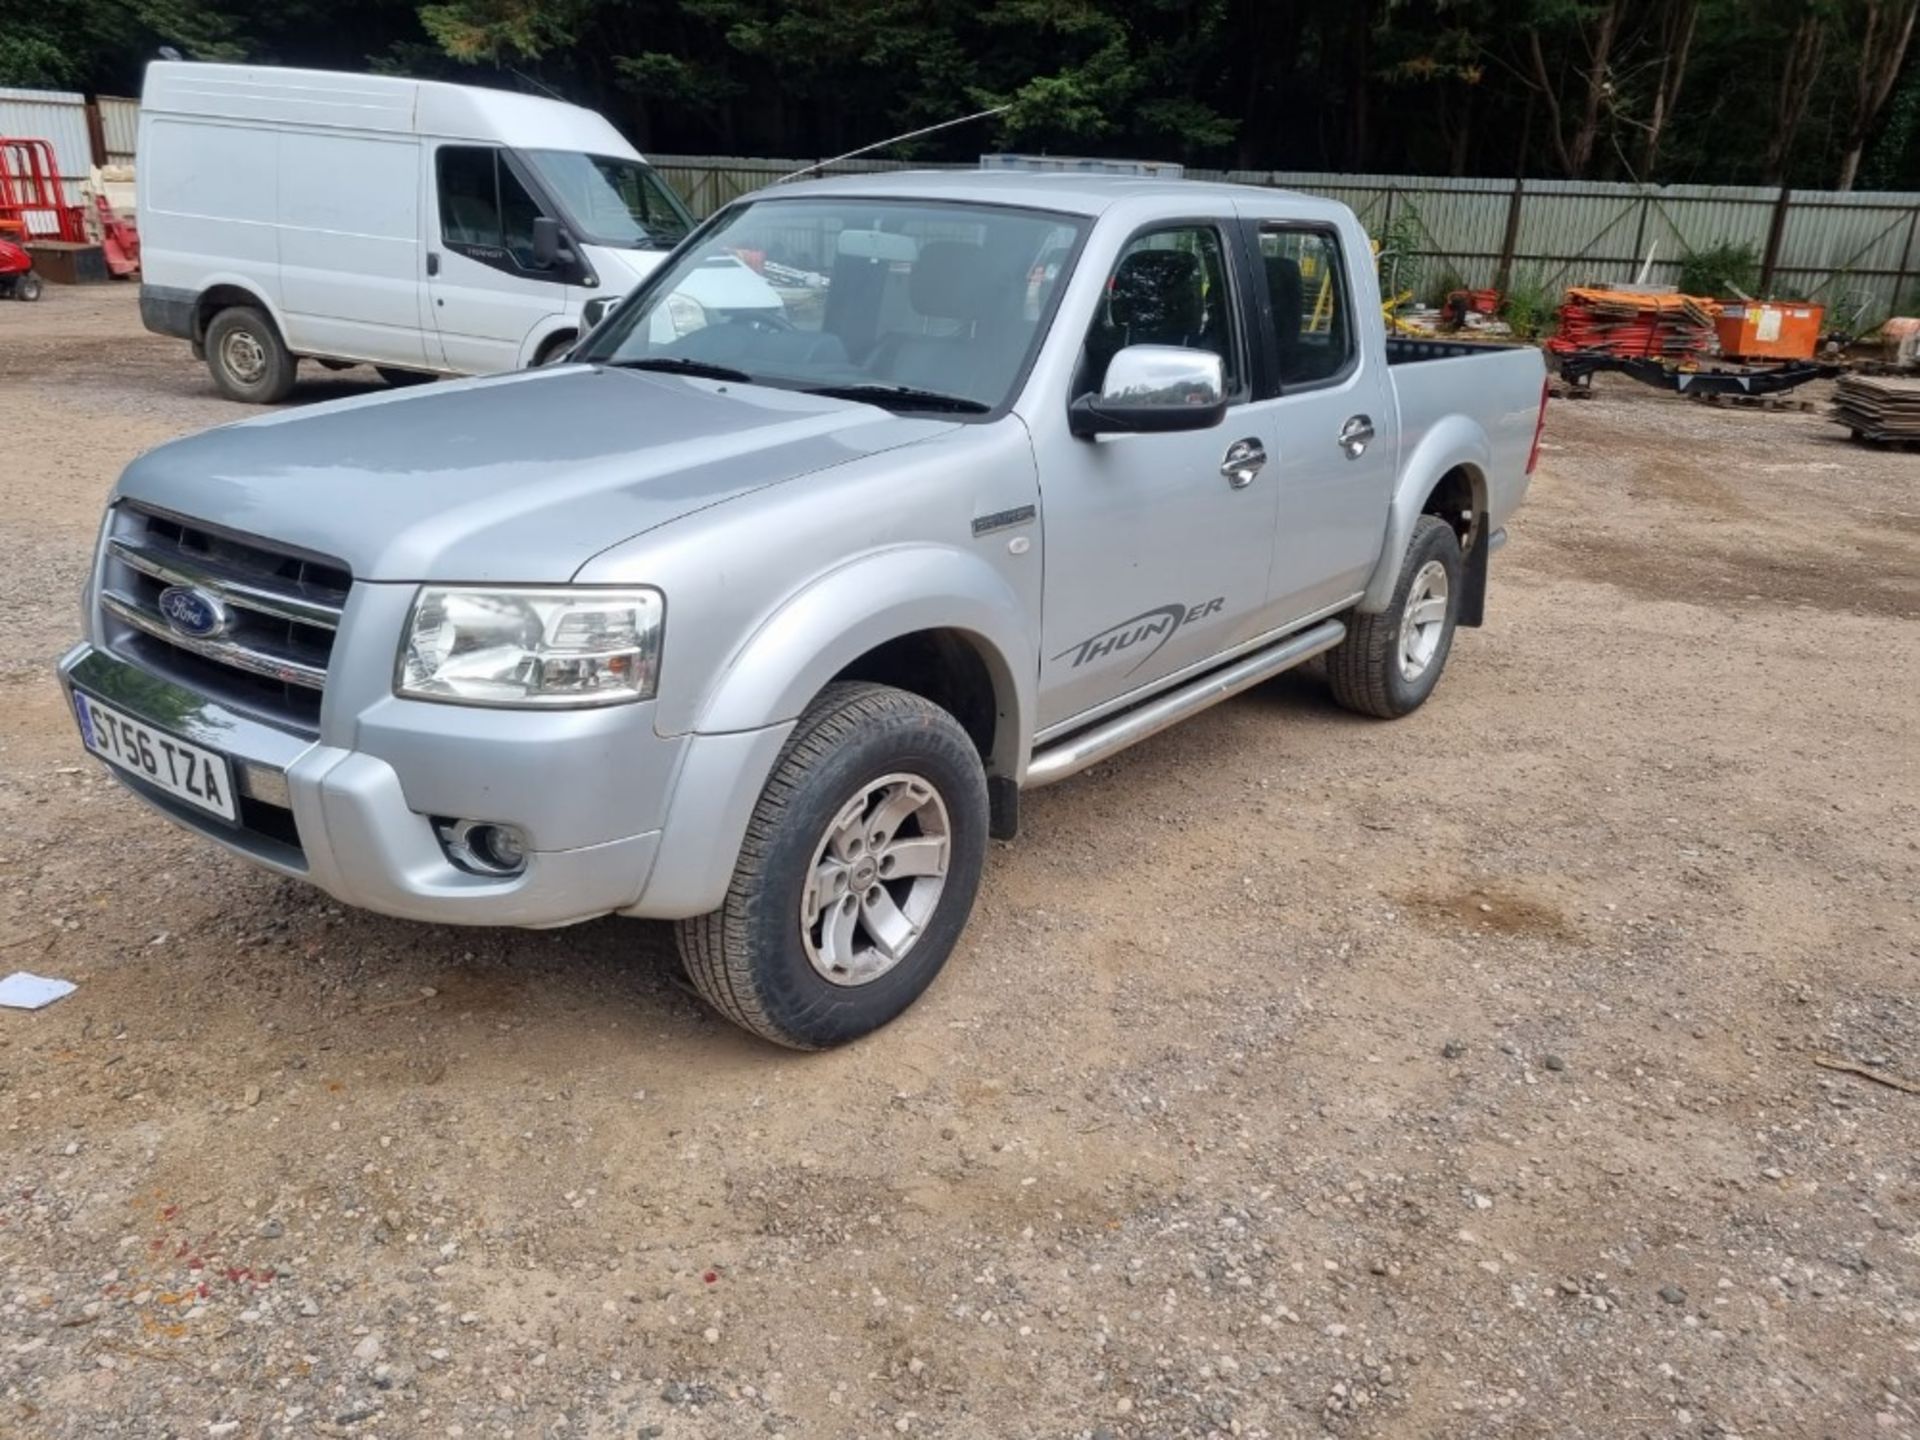 07/56 FORD RANGER THUNDER D/C 4WD - 2500cc 4dr 4x4 (Silver, 93k) - Image 4 of 9